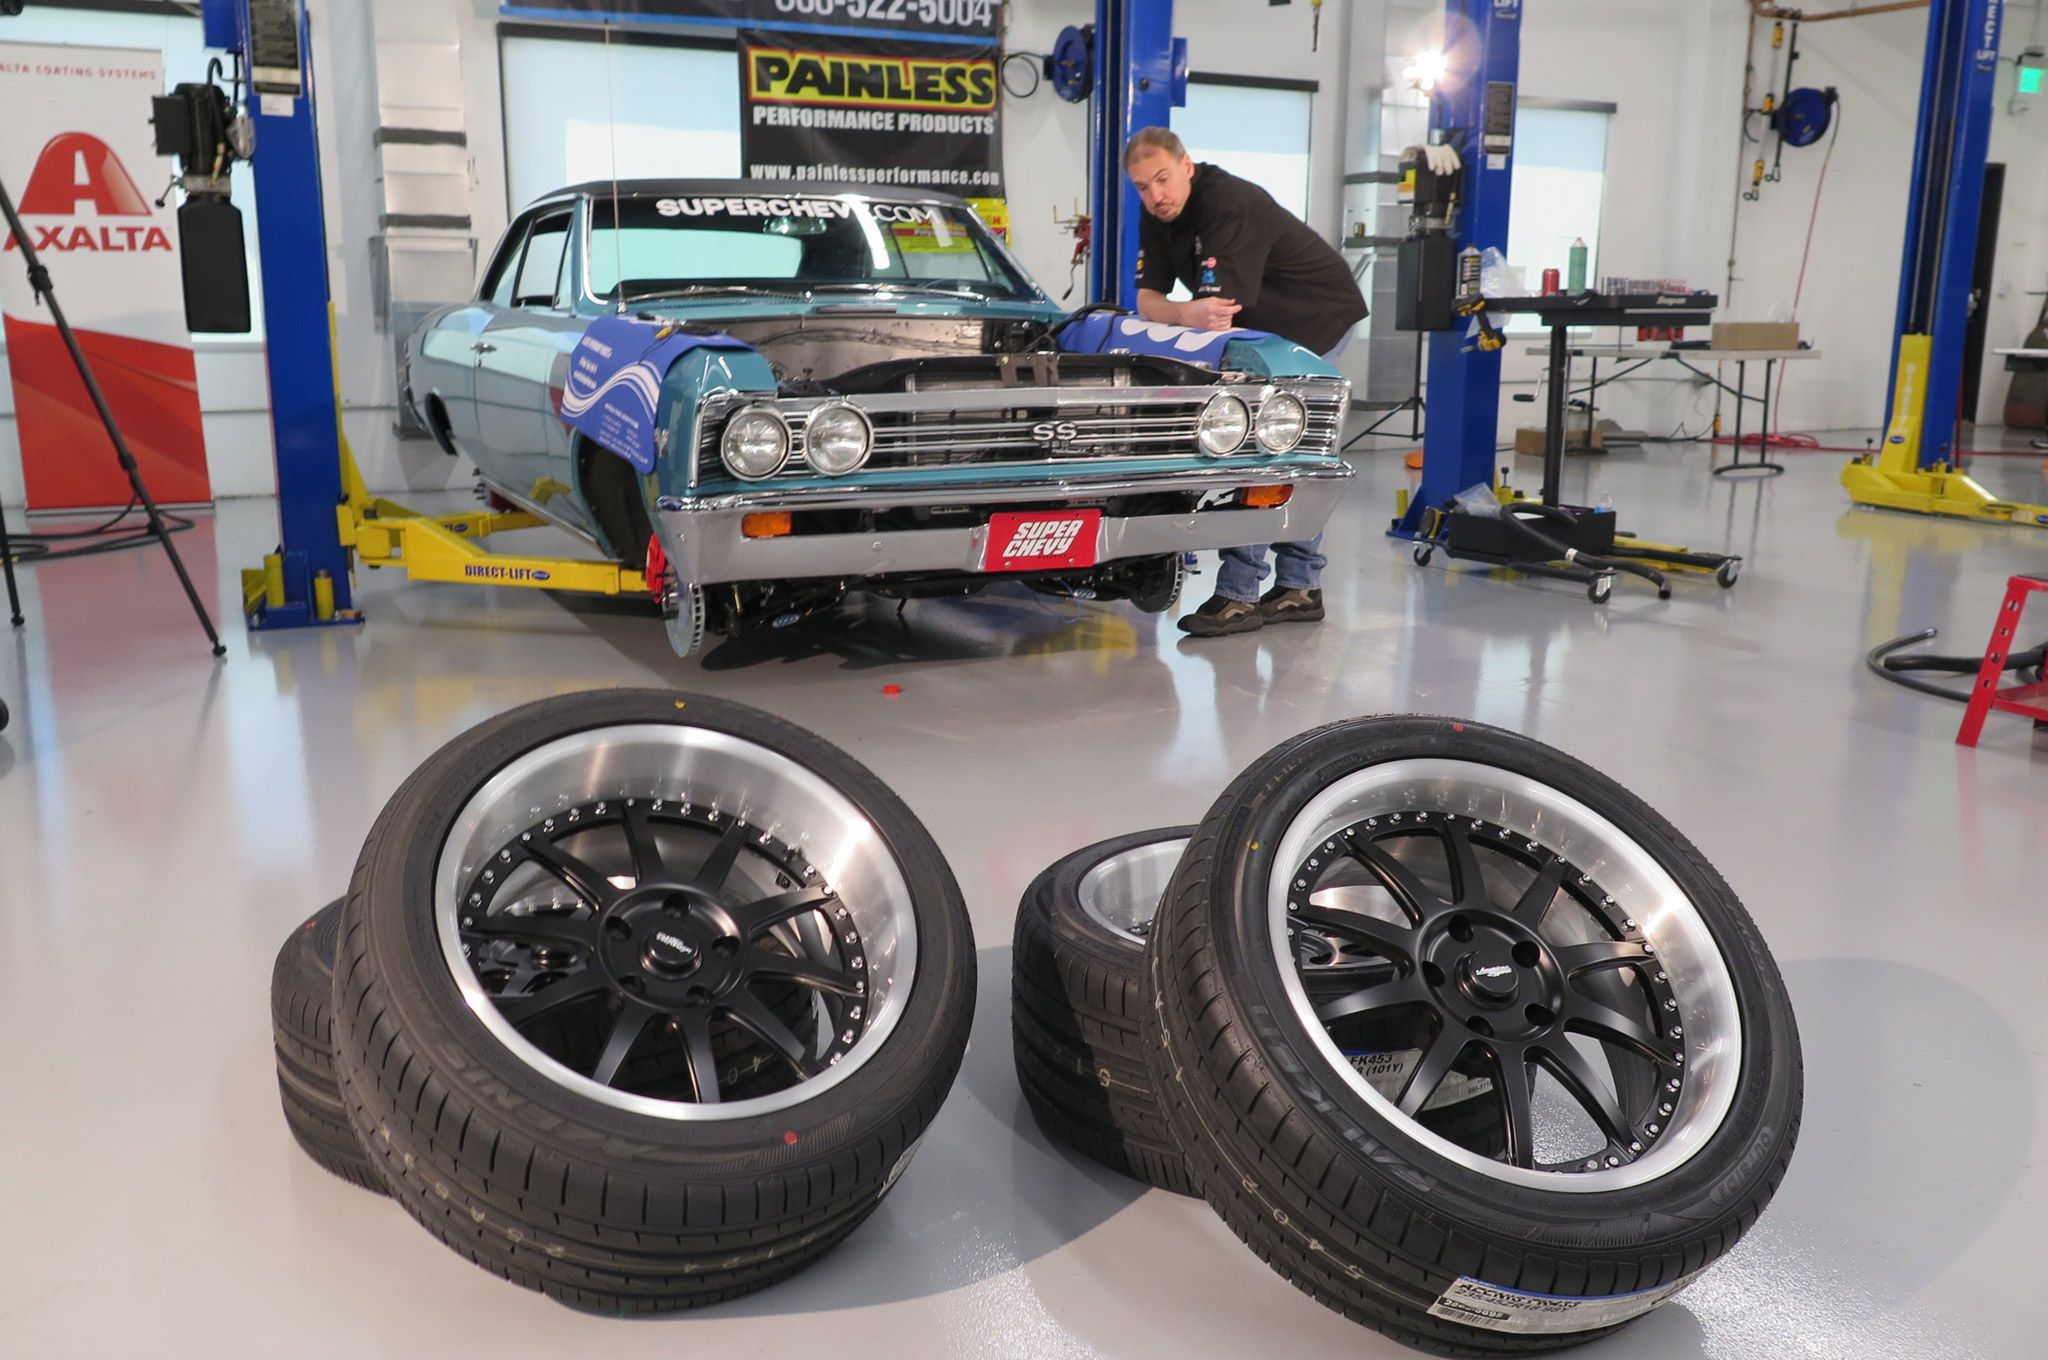 075-week-to-wicked-cpp-axalta-super-chevy-chevelle-day-3-cpp-candid-build-shots-tools-shop-falken-american-legend-wheels 